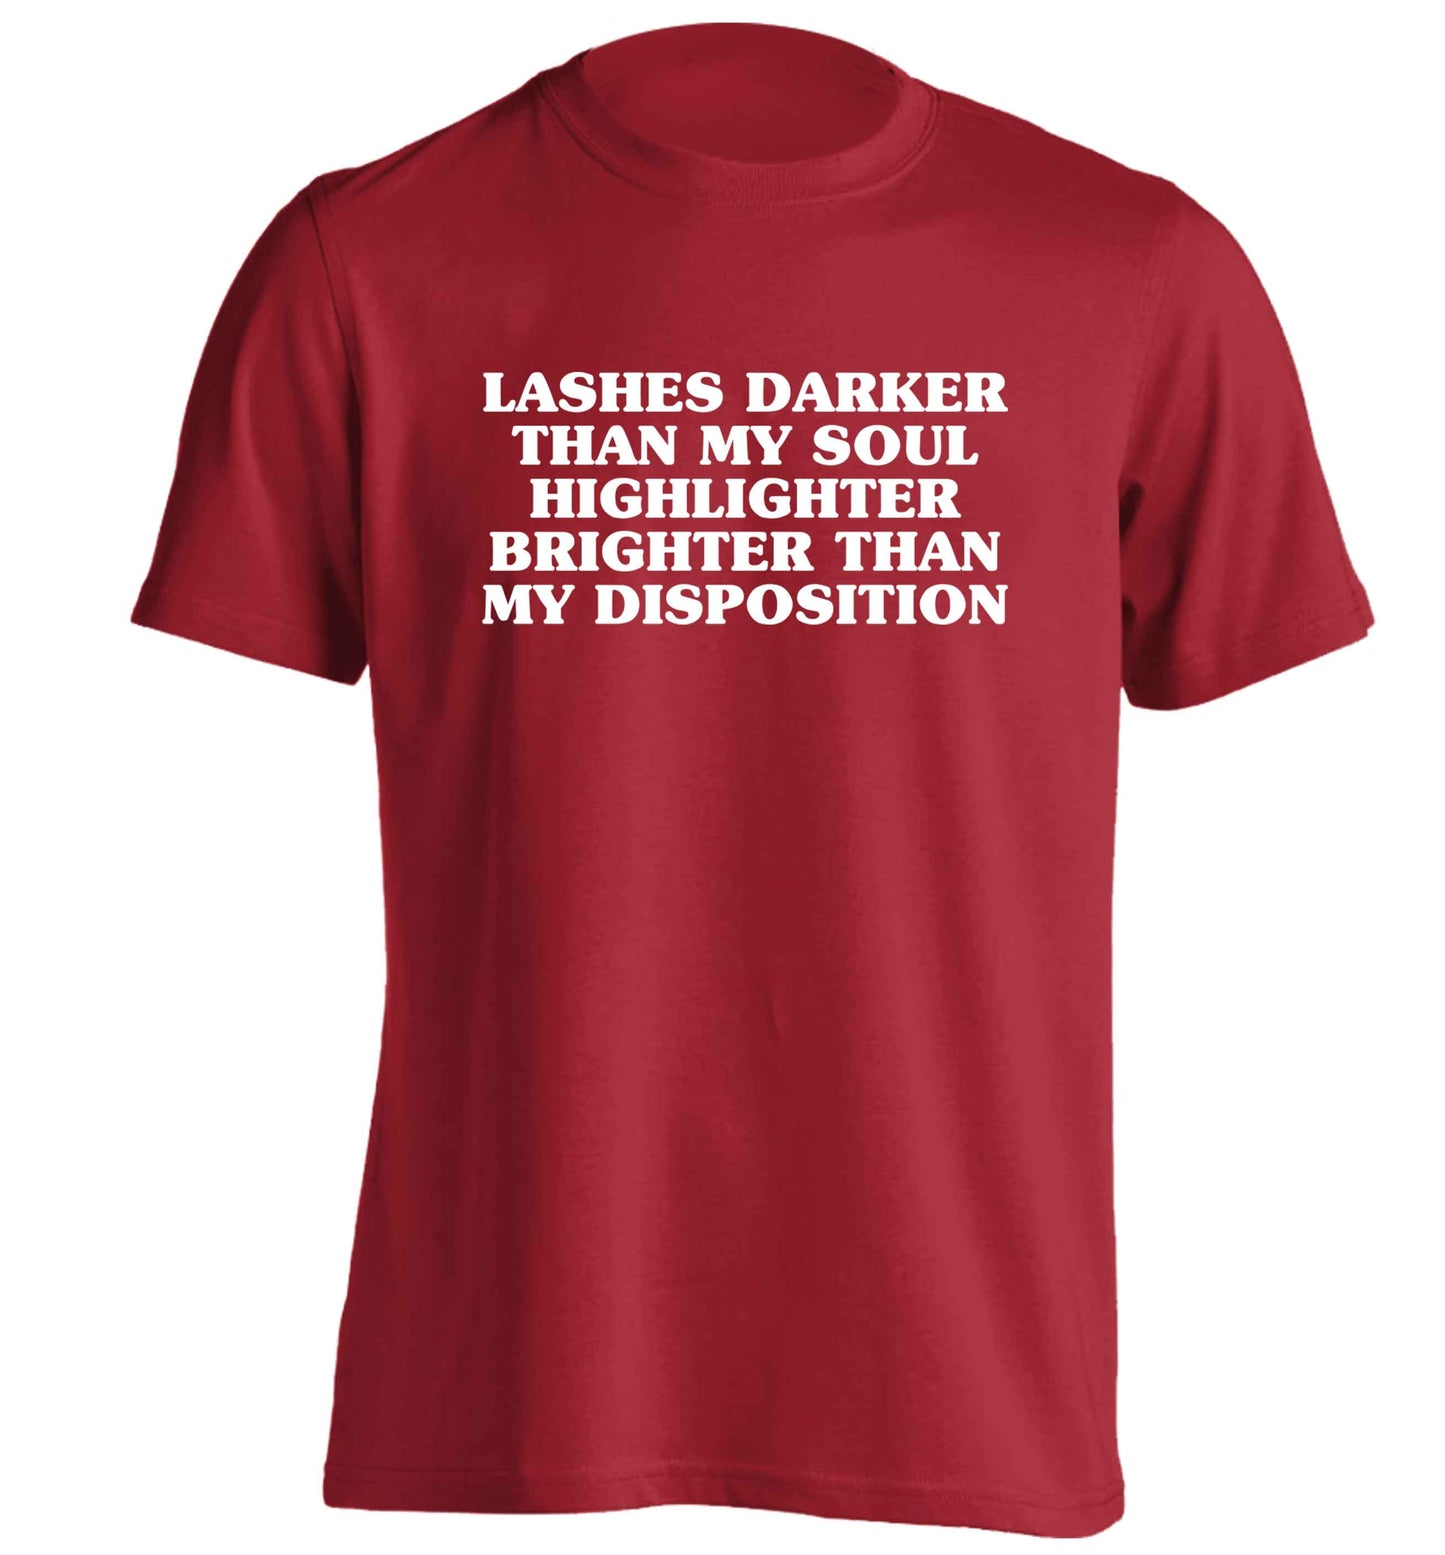 Lashes darker than my soul, highlighter brighter than my disposition adults unisex red Tshirt 2XL